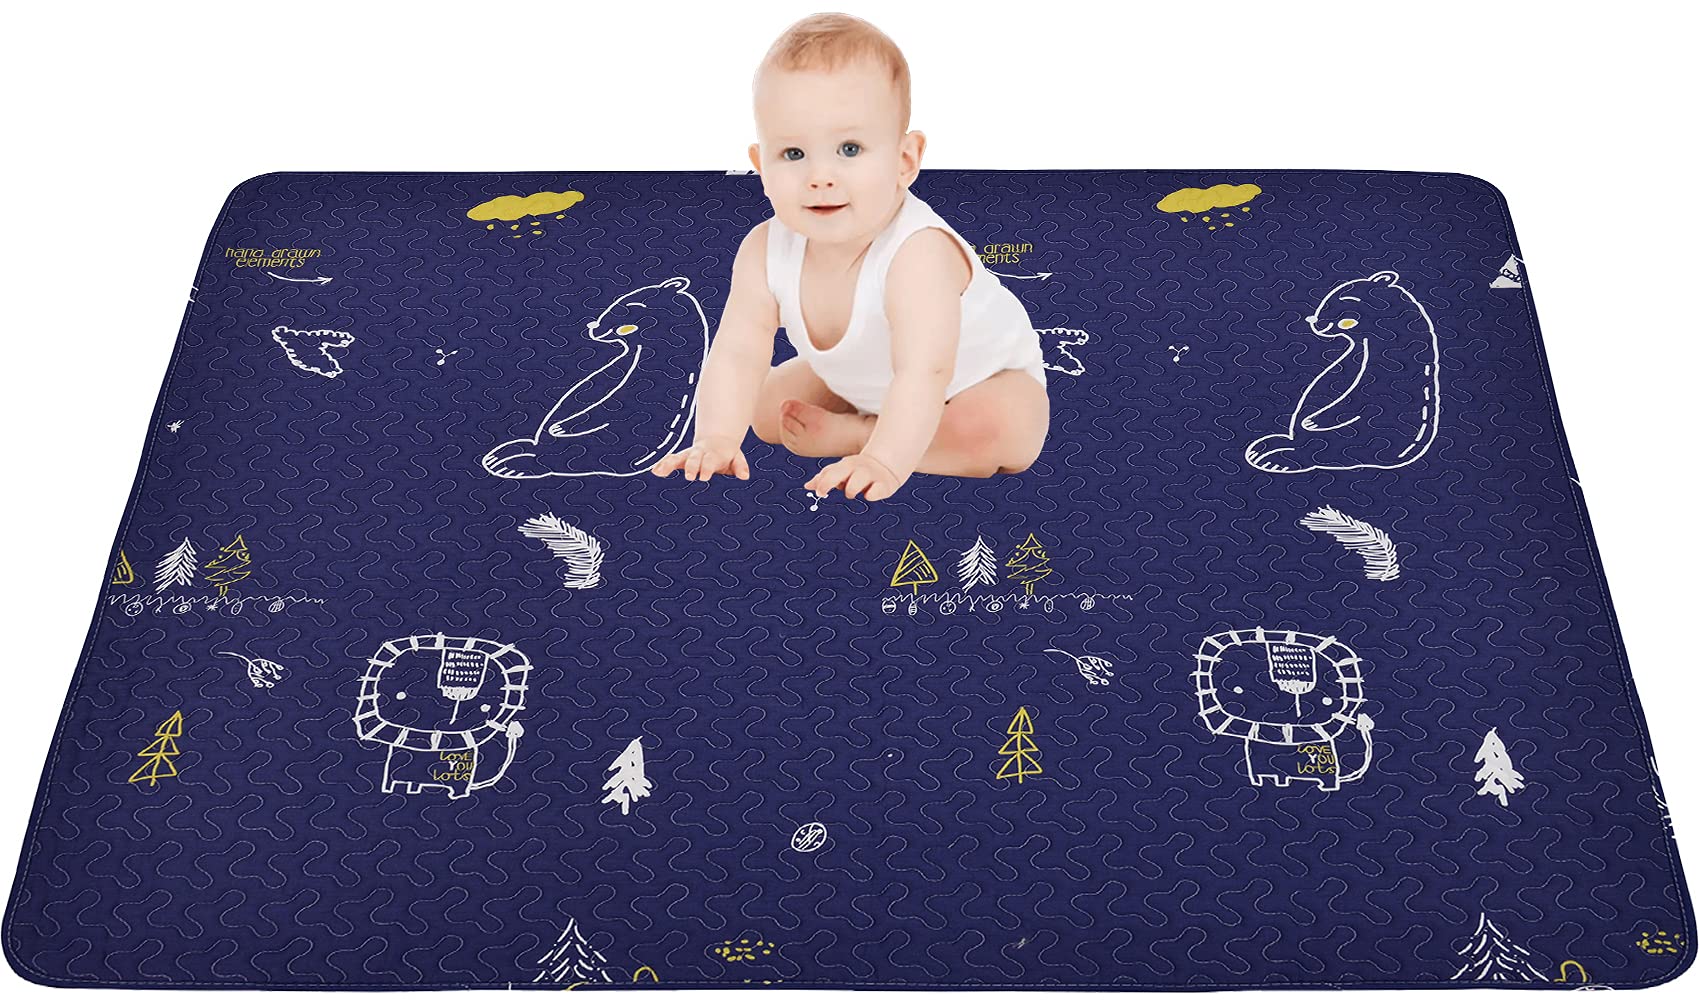 Portable Baby Play Mat Machine Washable, Foldable Crawling Mat for Floor 43x43” Baby Playpen Mat, Soft Non Slip Non-Toxic Playmats for Infants, Kids Tent Mat Square